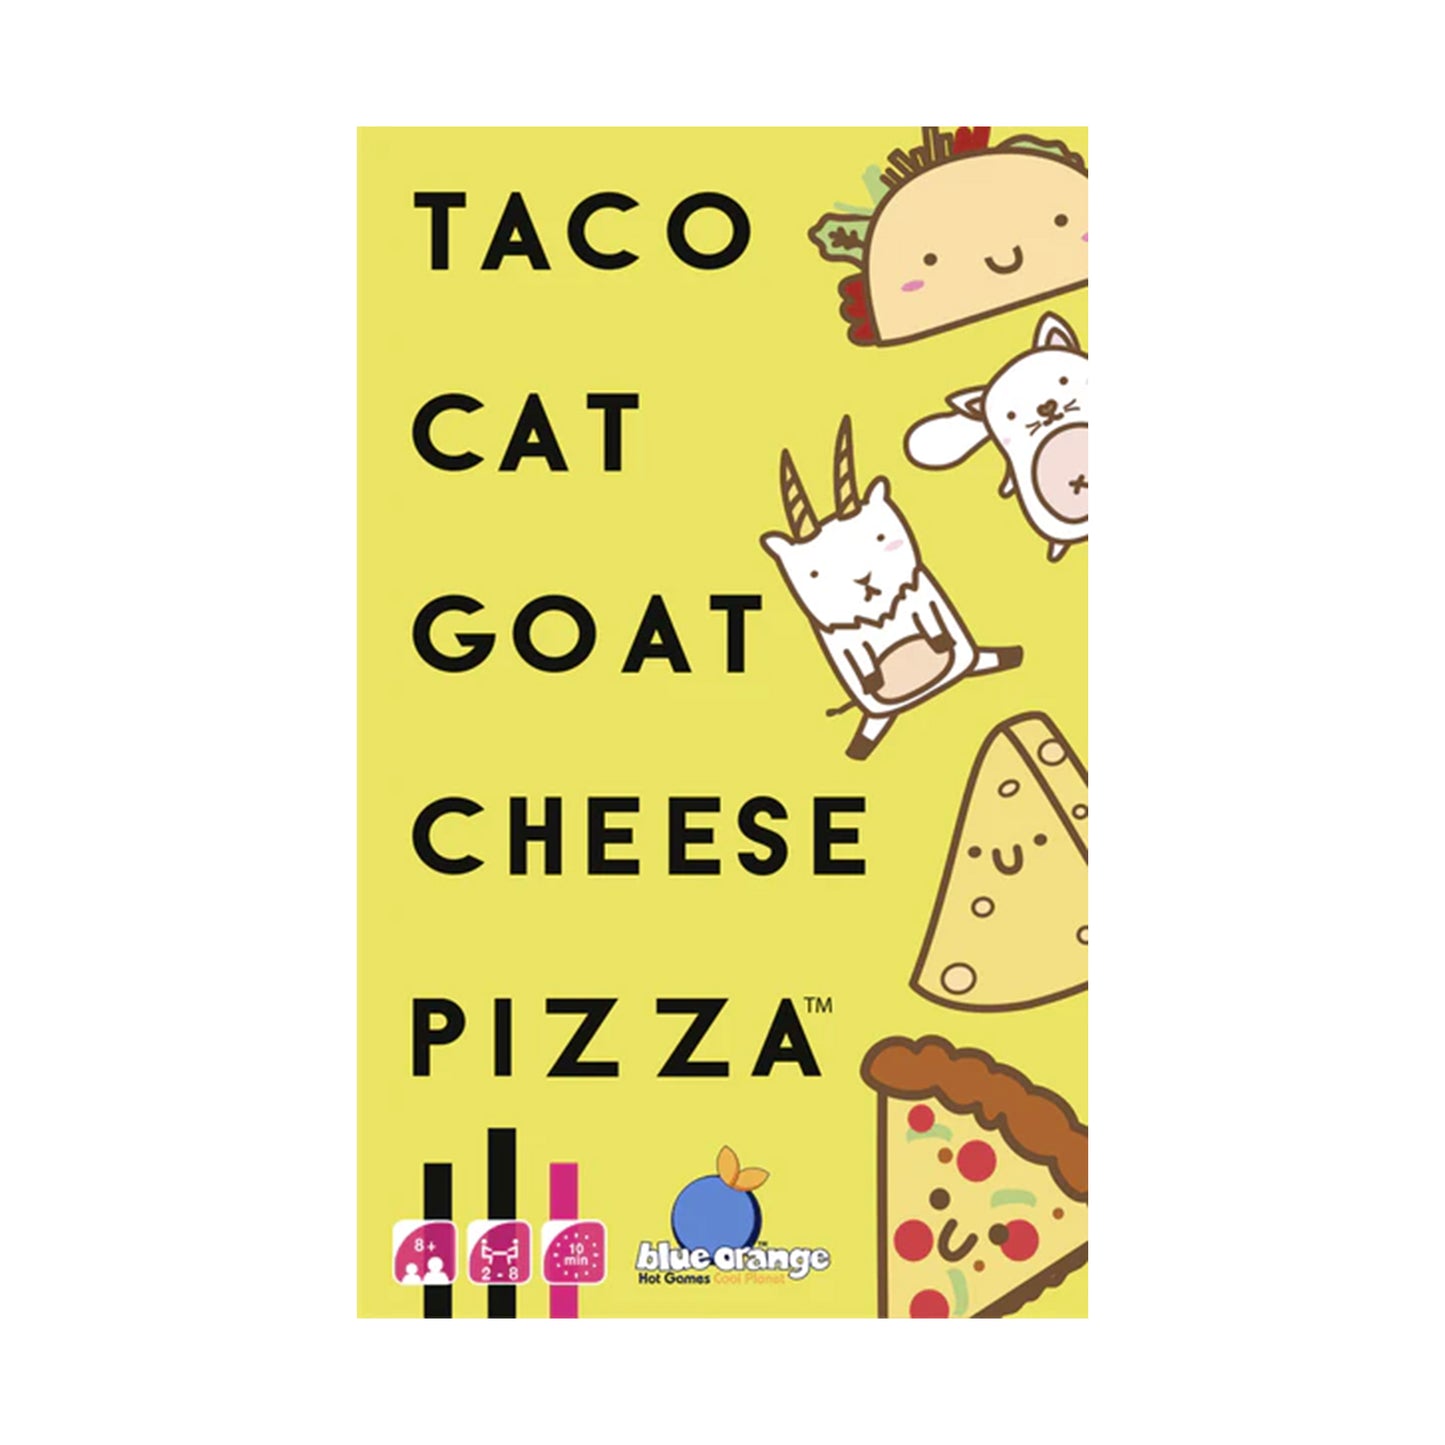 Taco Cat Goat Cheese Pizza (PH Edition, with Tarsier Card)